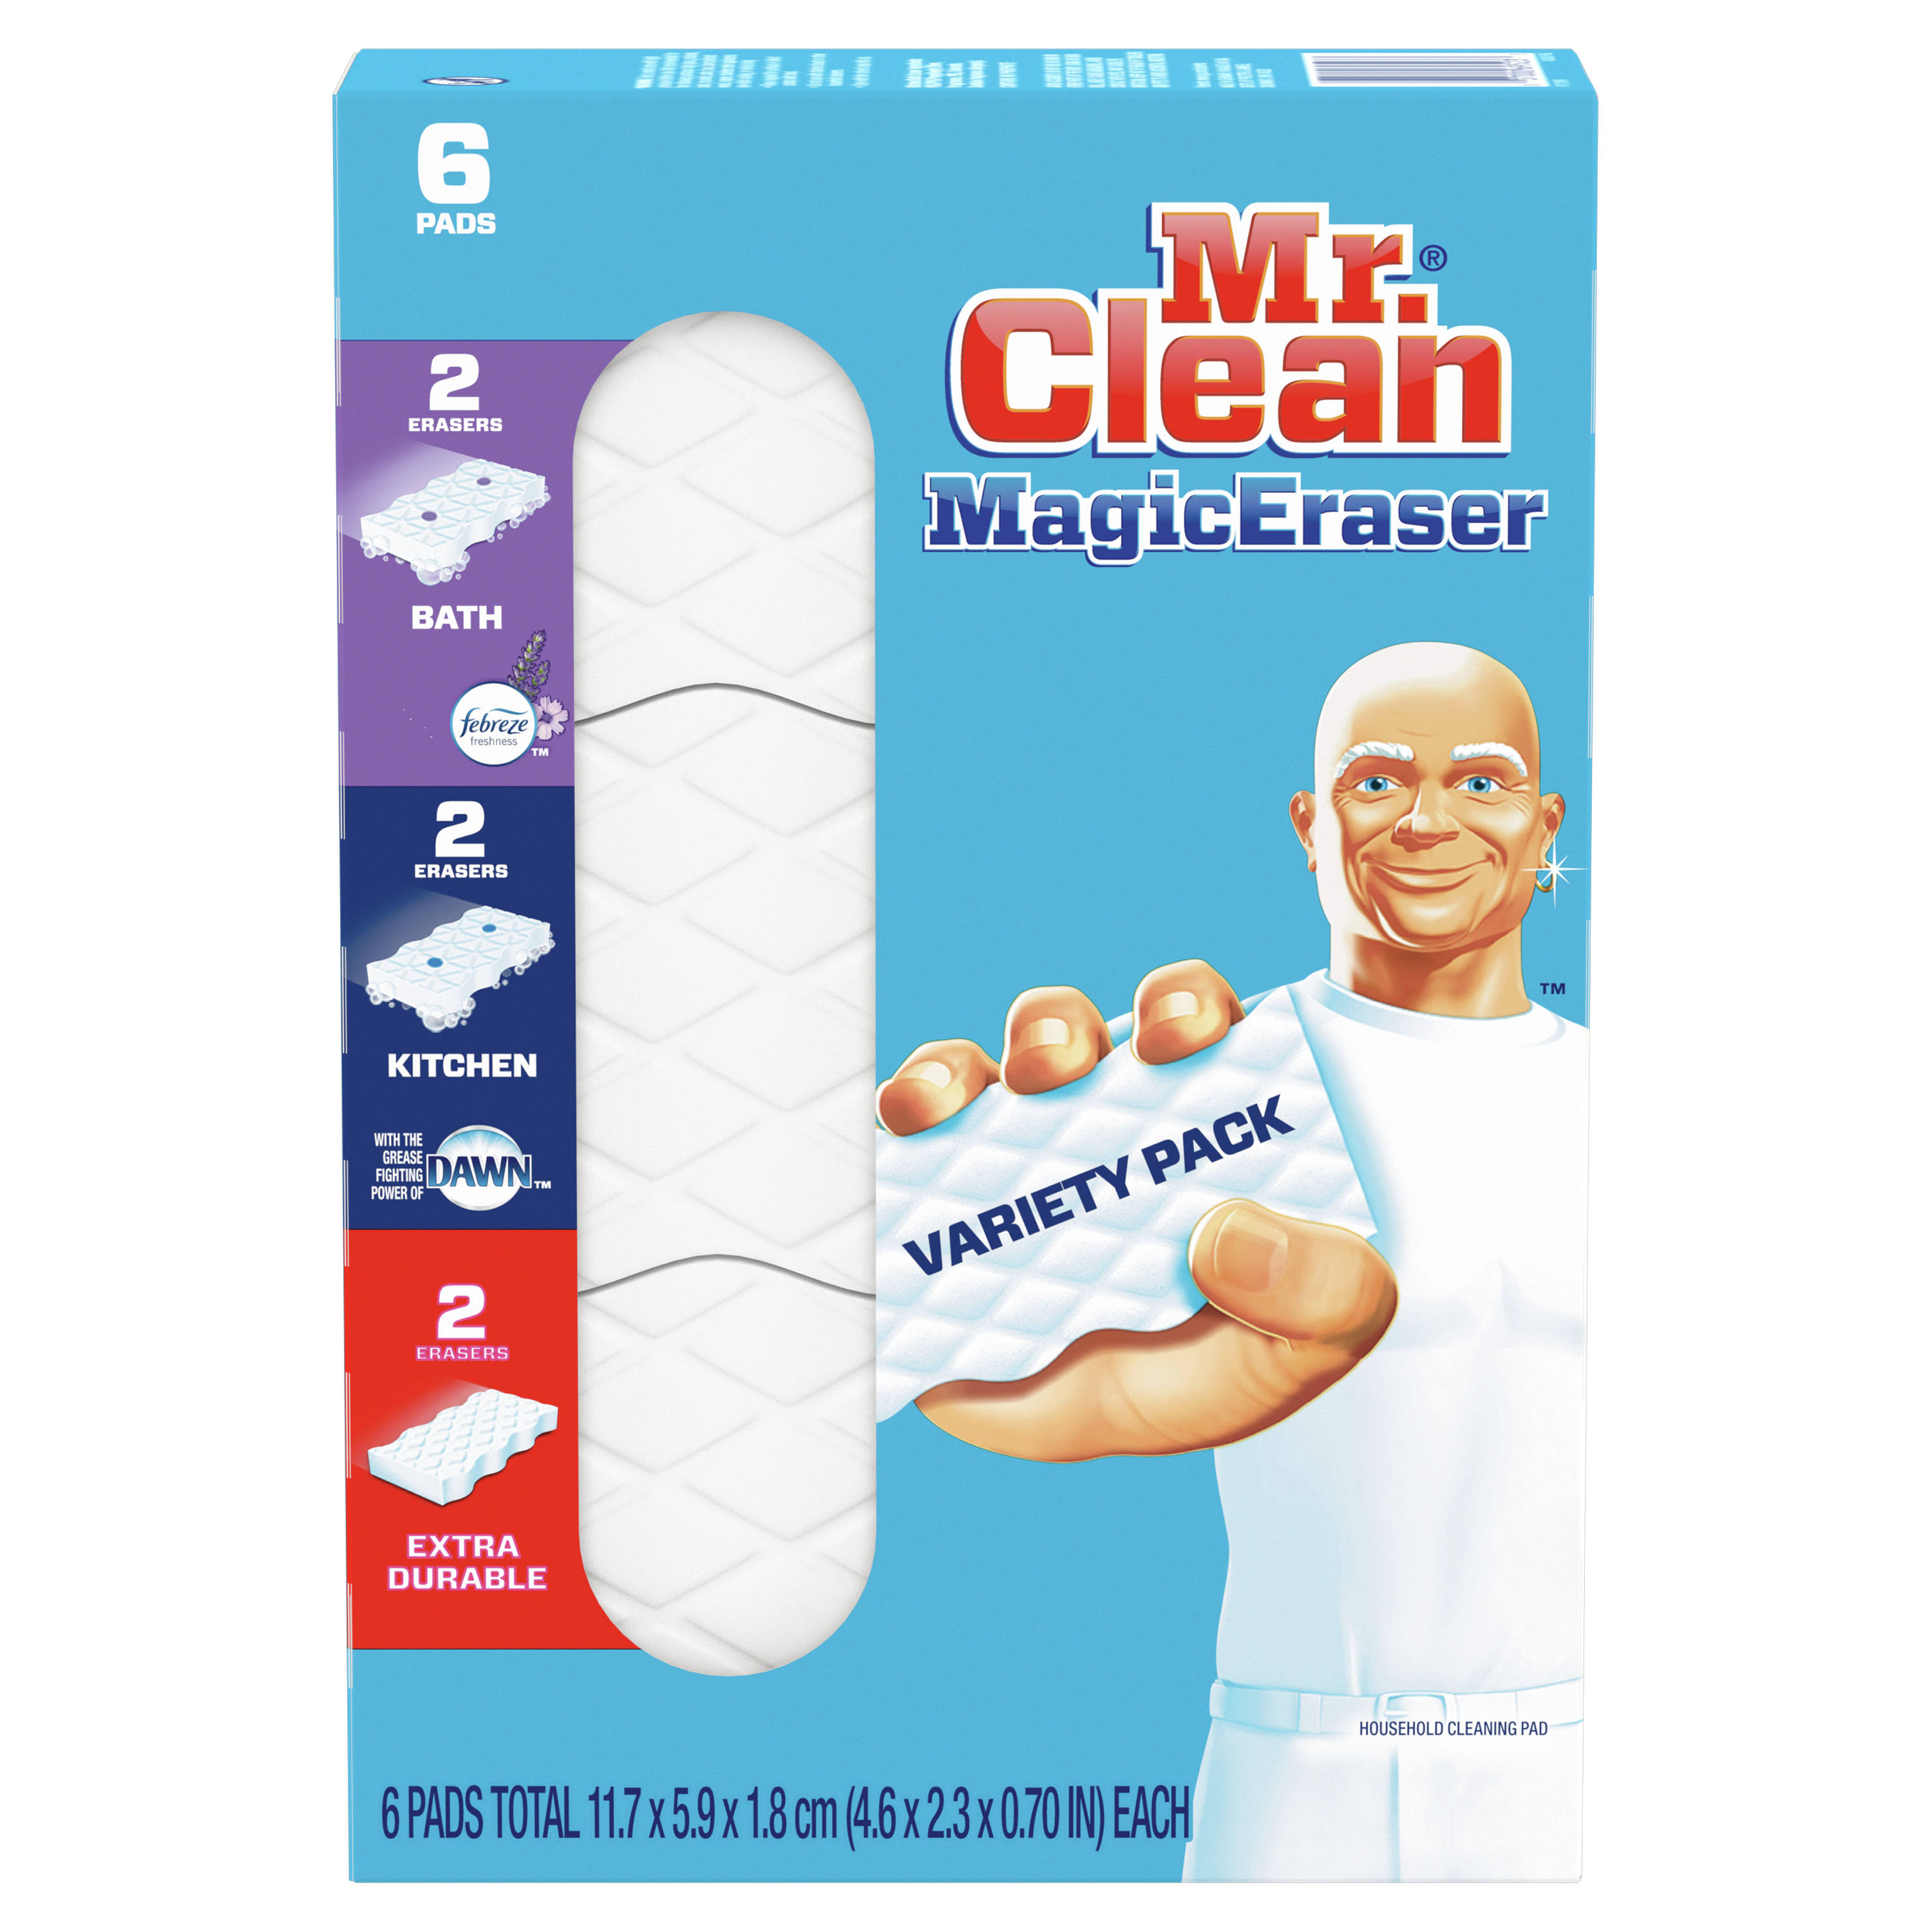 Mr Clean Magic Eraser Variety Pack Assortment Cleaning Pads, 6 count